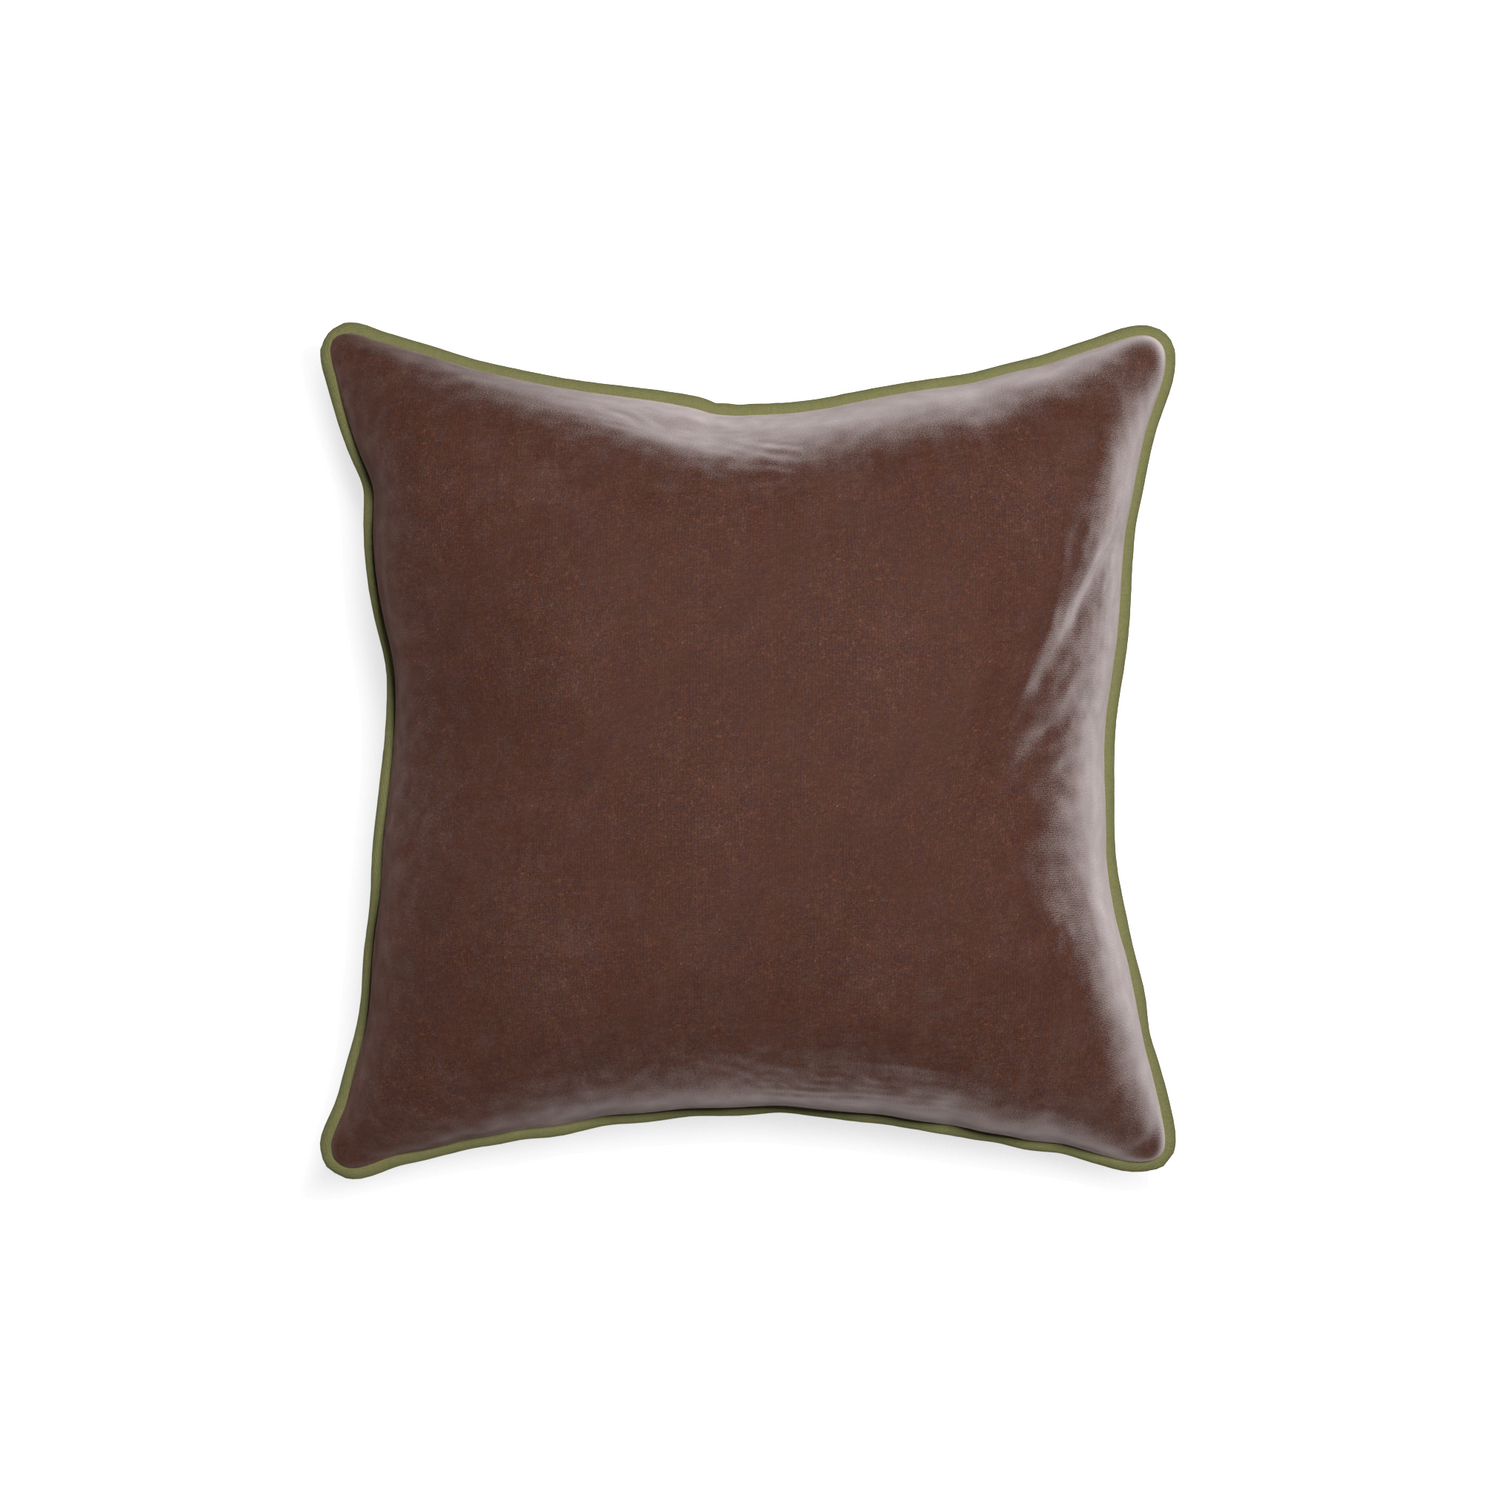 18-square walnut velvet custom pillow with moss piping on white background